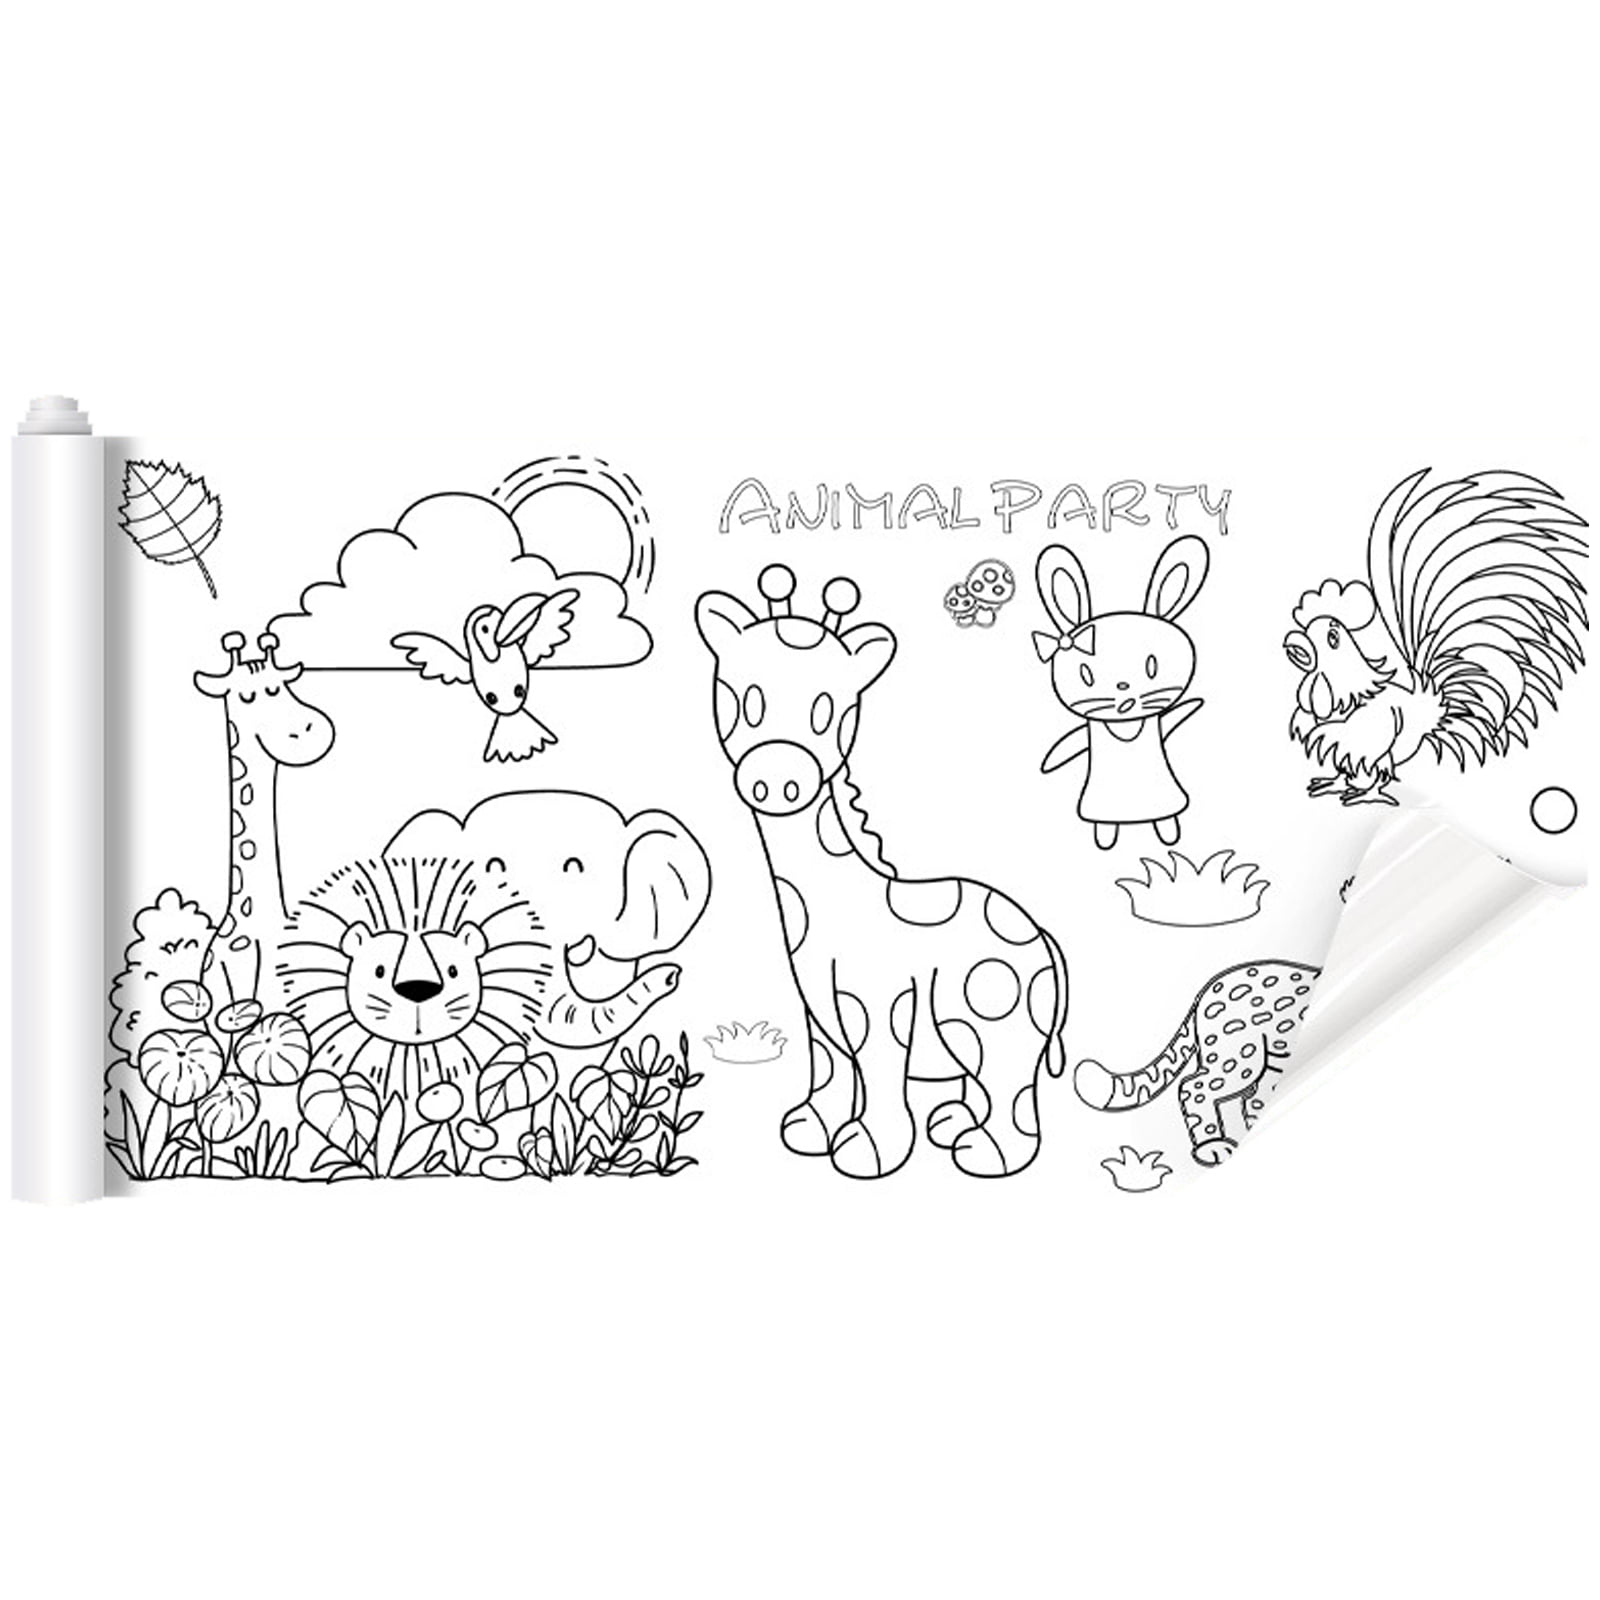 QWANG Children's Drawing Roll, DIY Painting Coloring Paper Roll,118X11.8  Inch Upgrade Large Drawing Roll Paper for Kids,Sticky Toddler Coloring Art  Paper,Wall Coloring Stickers(Vehicle) 